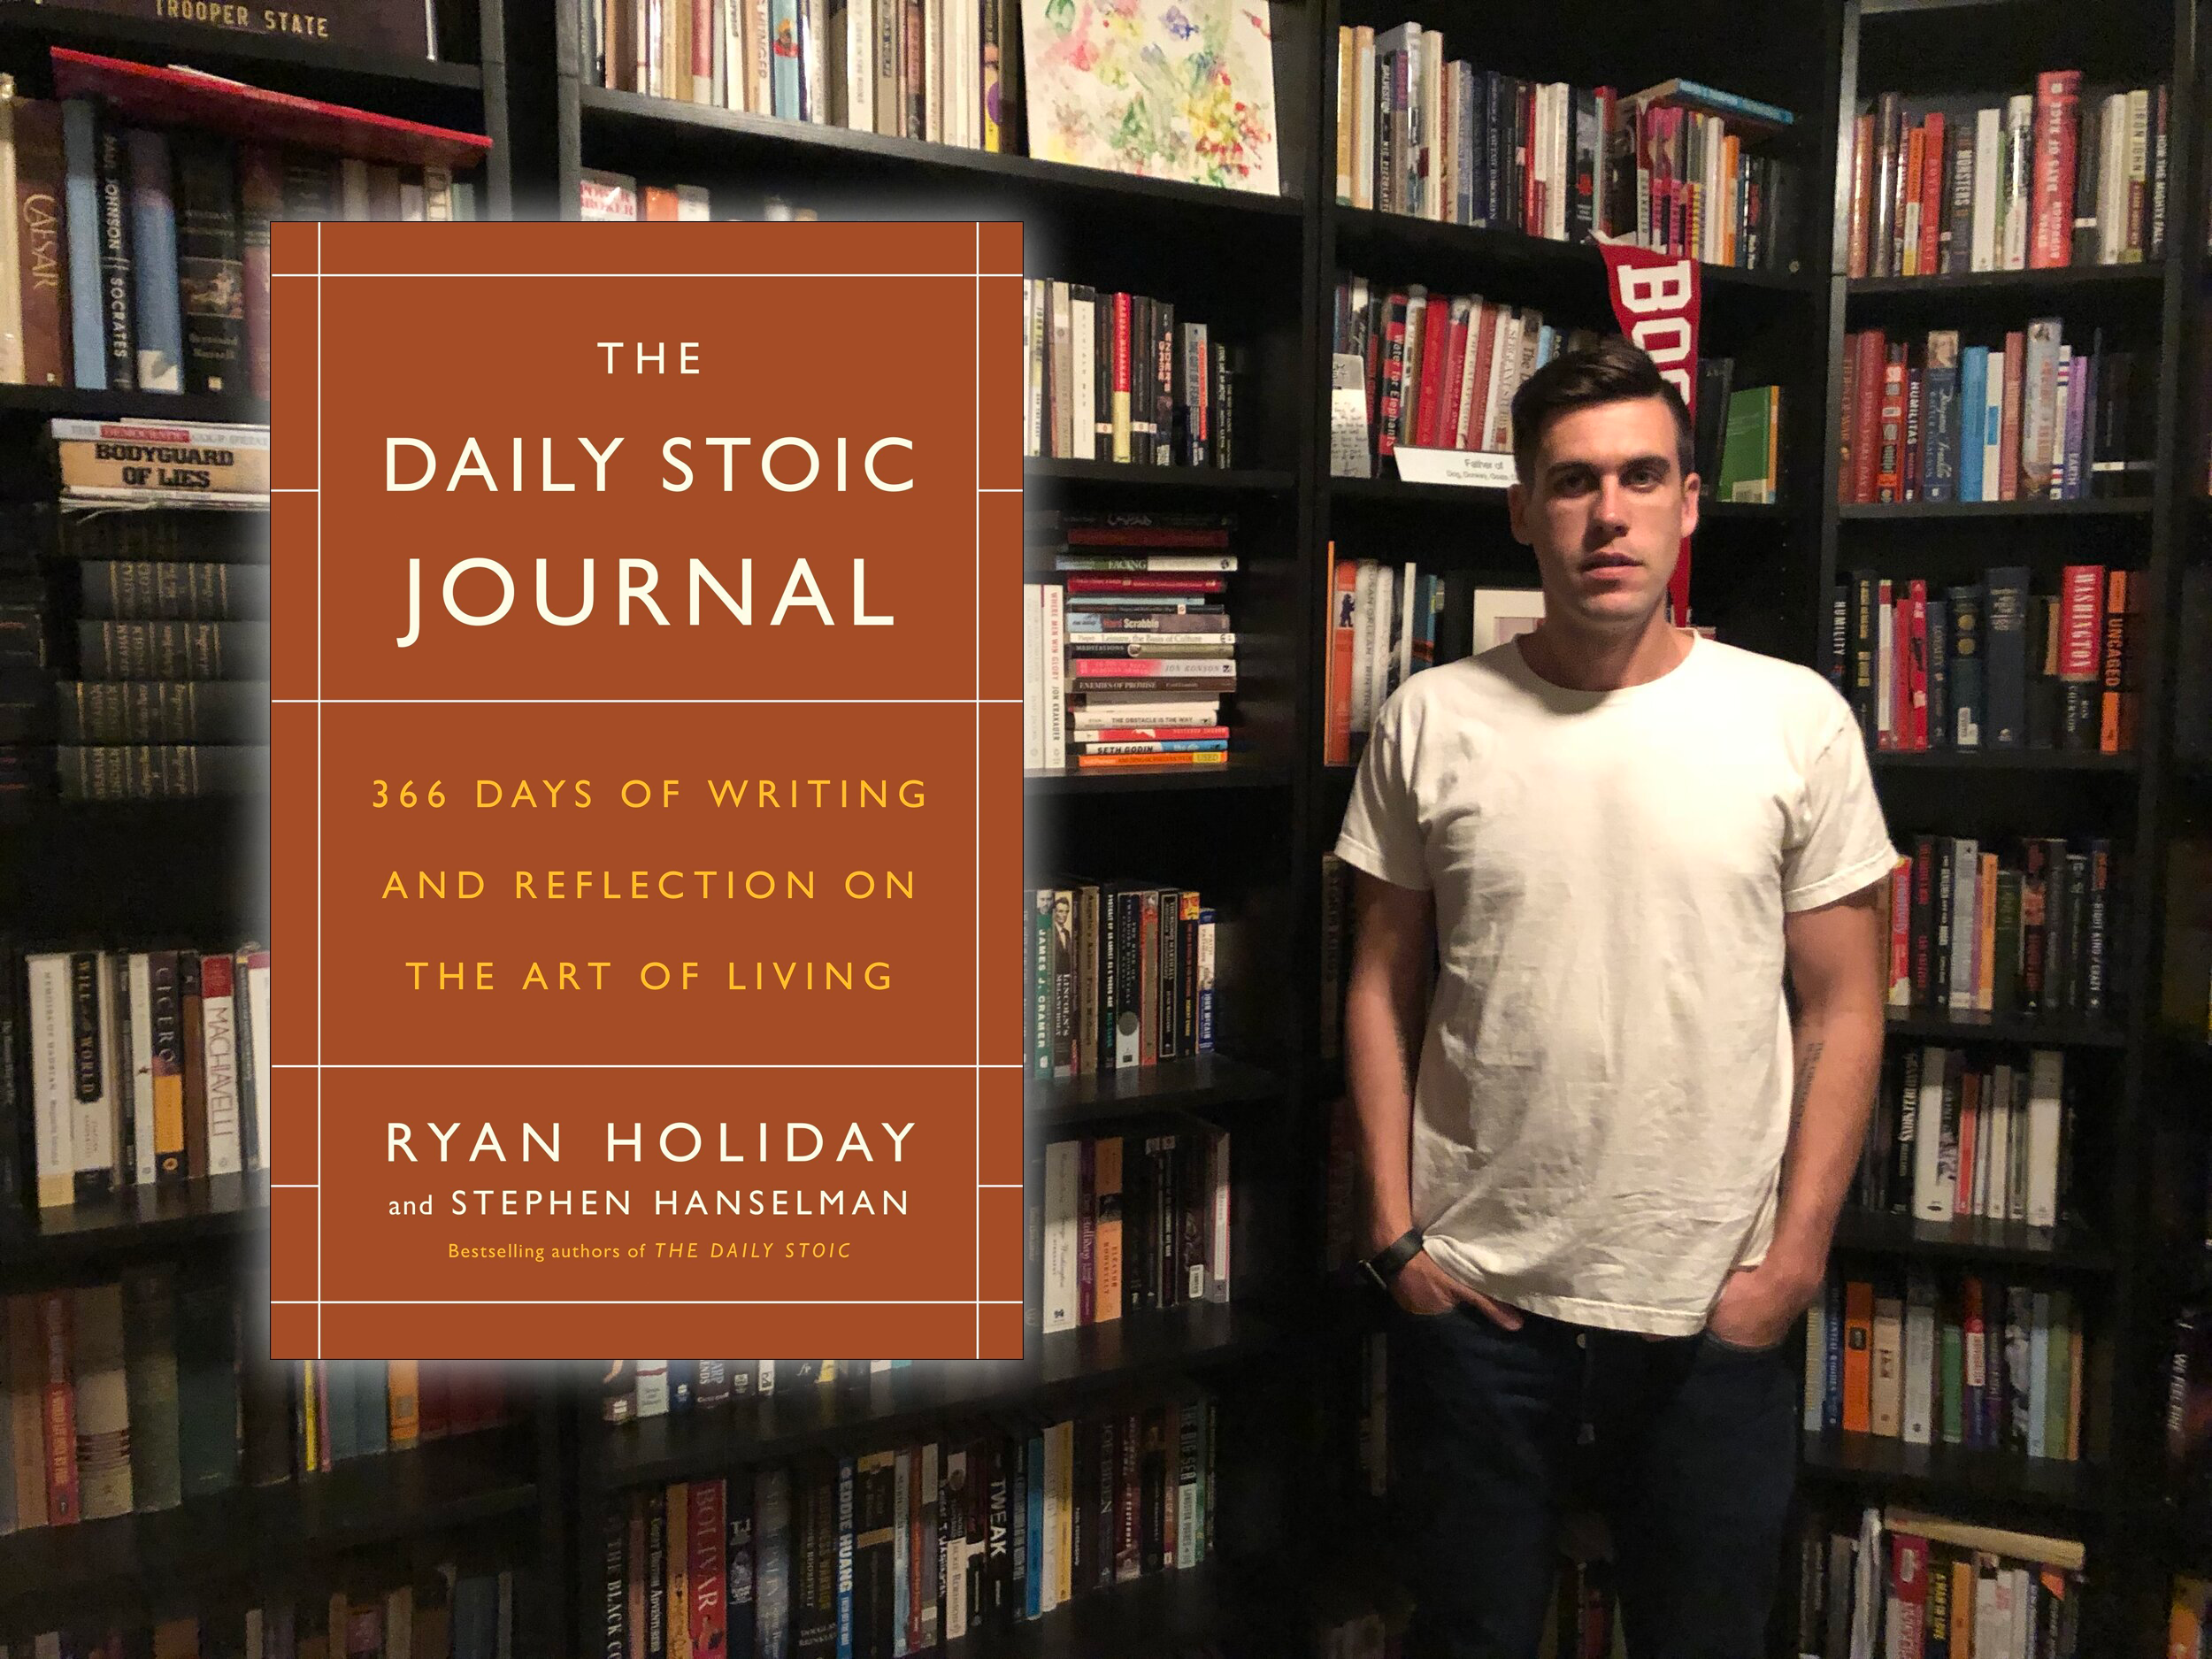 Ryan Holiday, author of "The Daily Stoic Journal" standing in front of a bookshelf